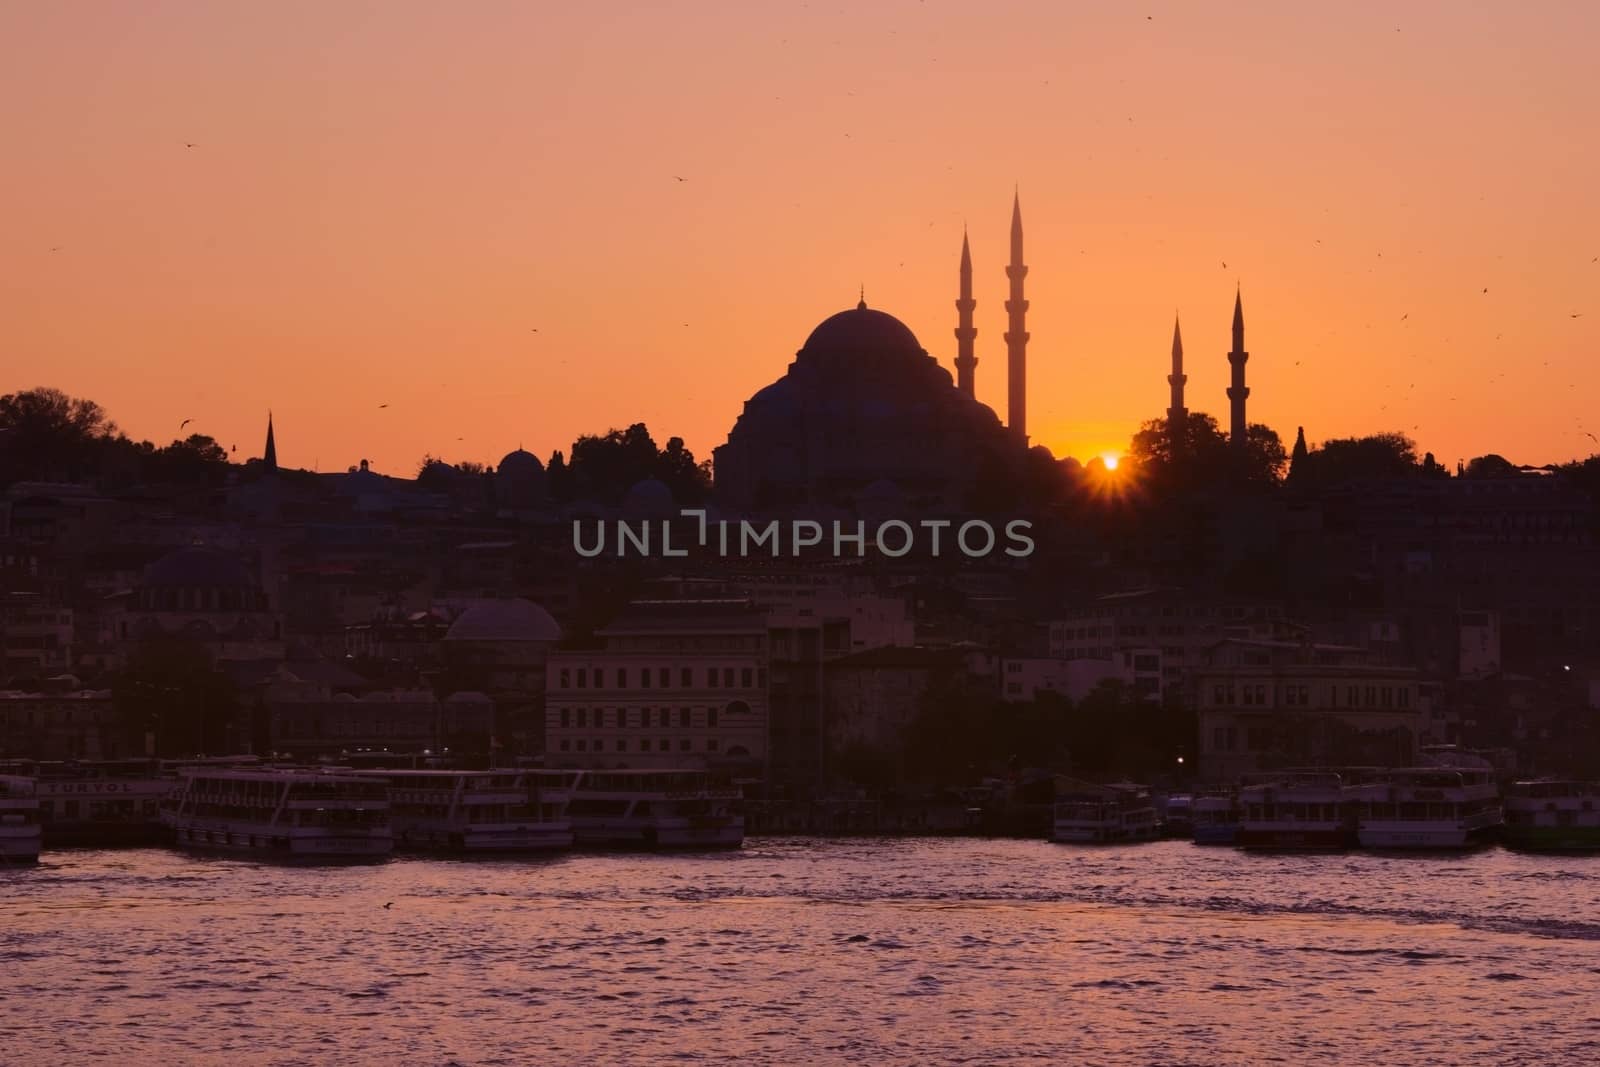 Hagia Sophia, the most important tourist attraction of Istanbul, Turkey, silhouetted against the twilight sky from across the Bosphorus. by hernan_hyper